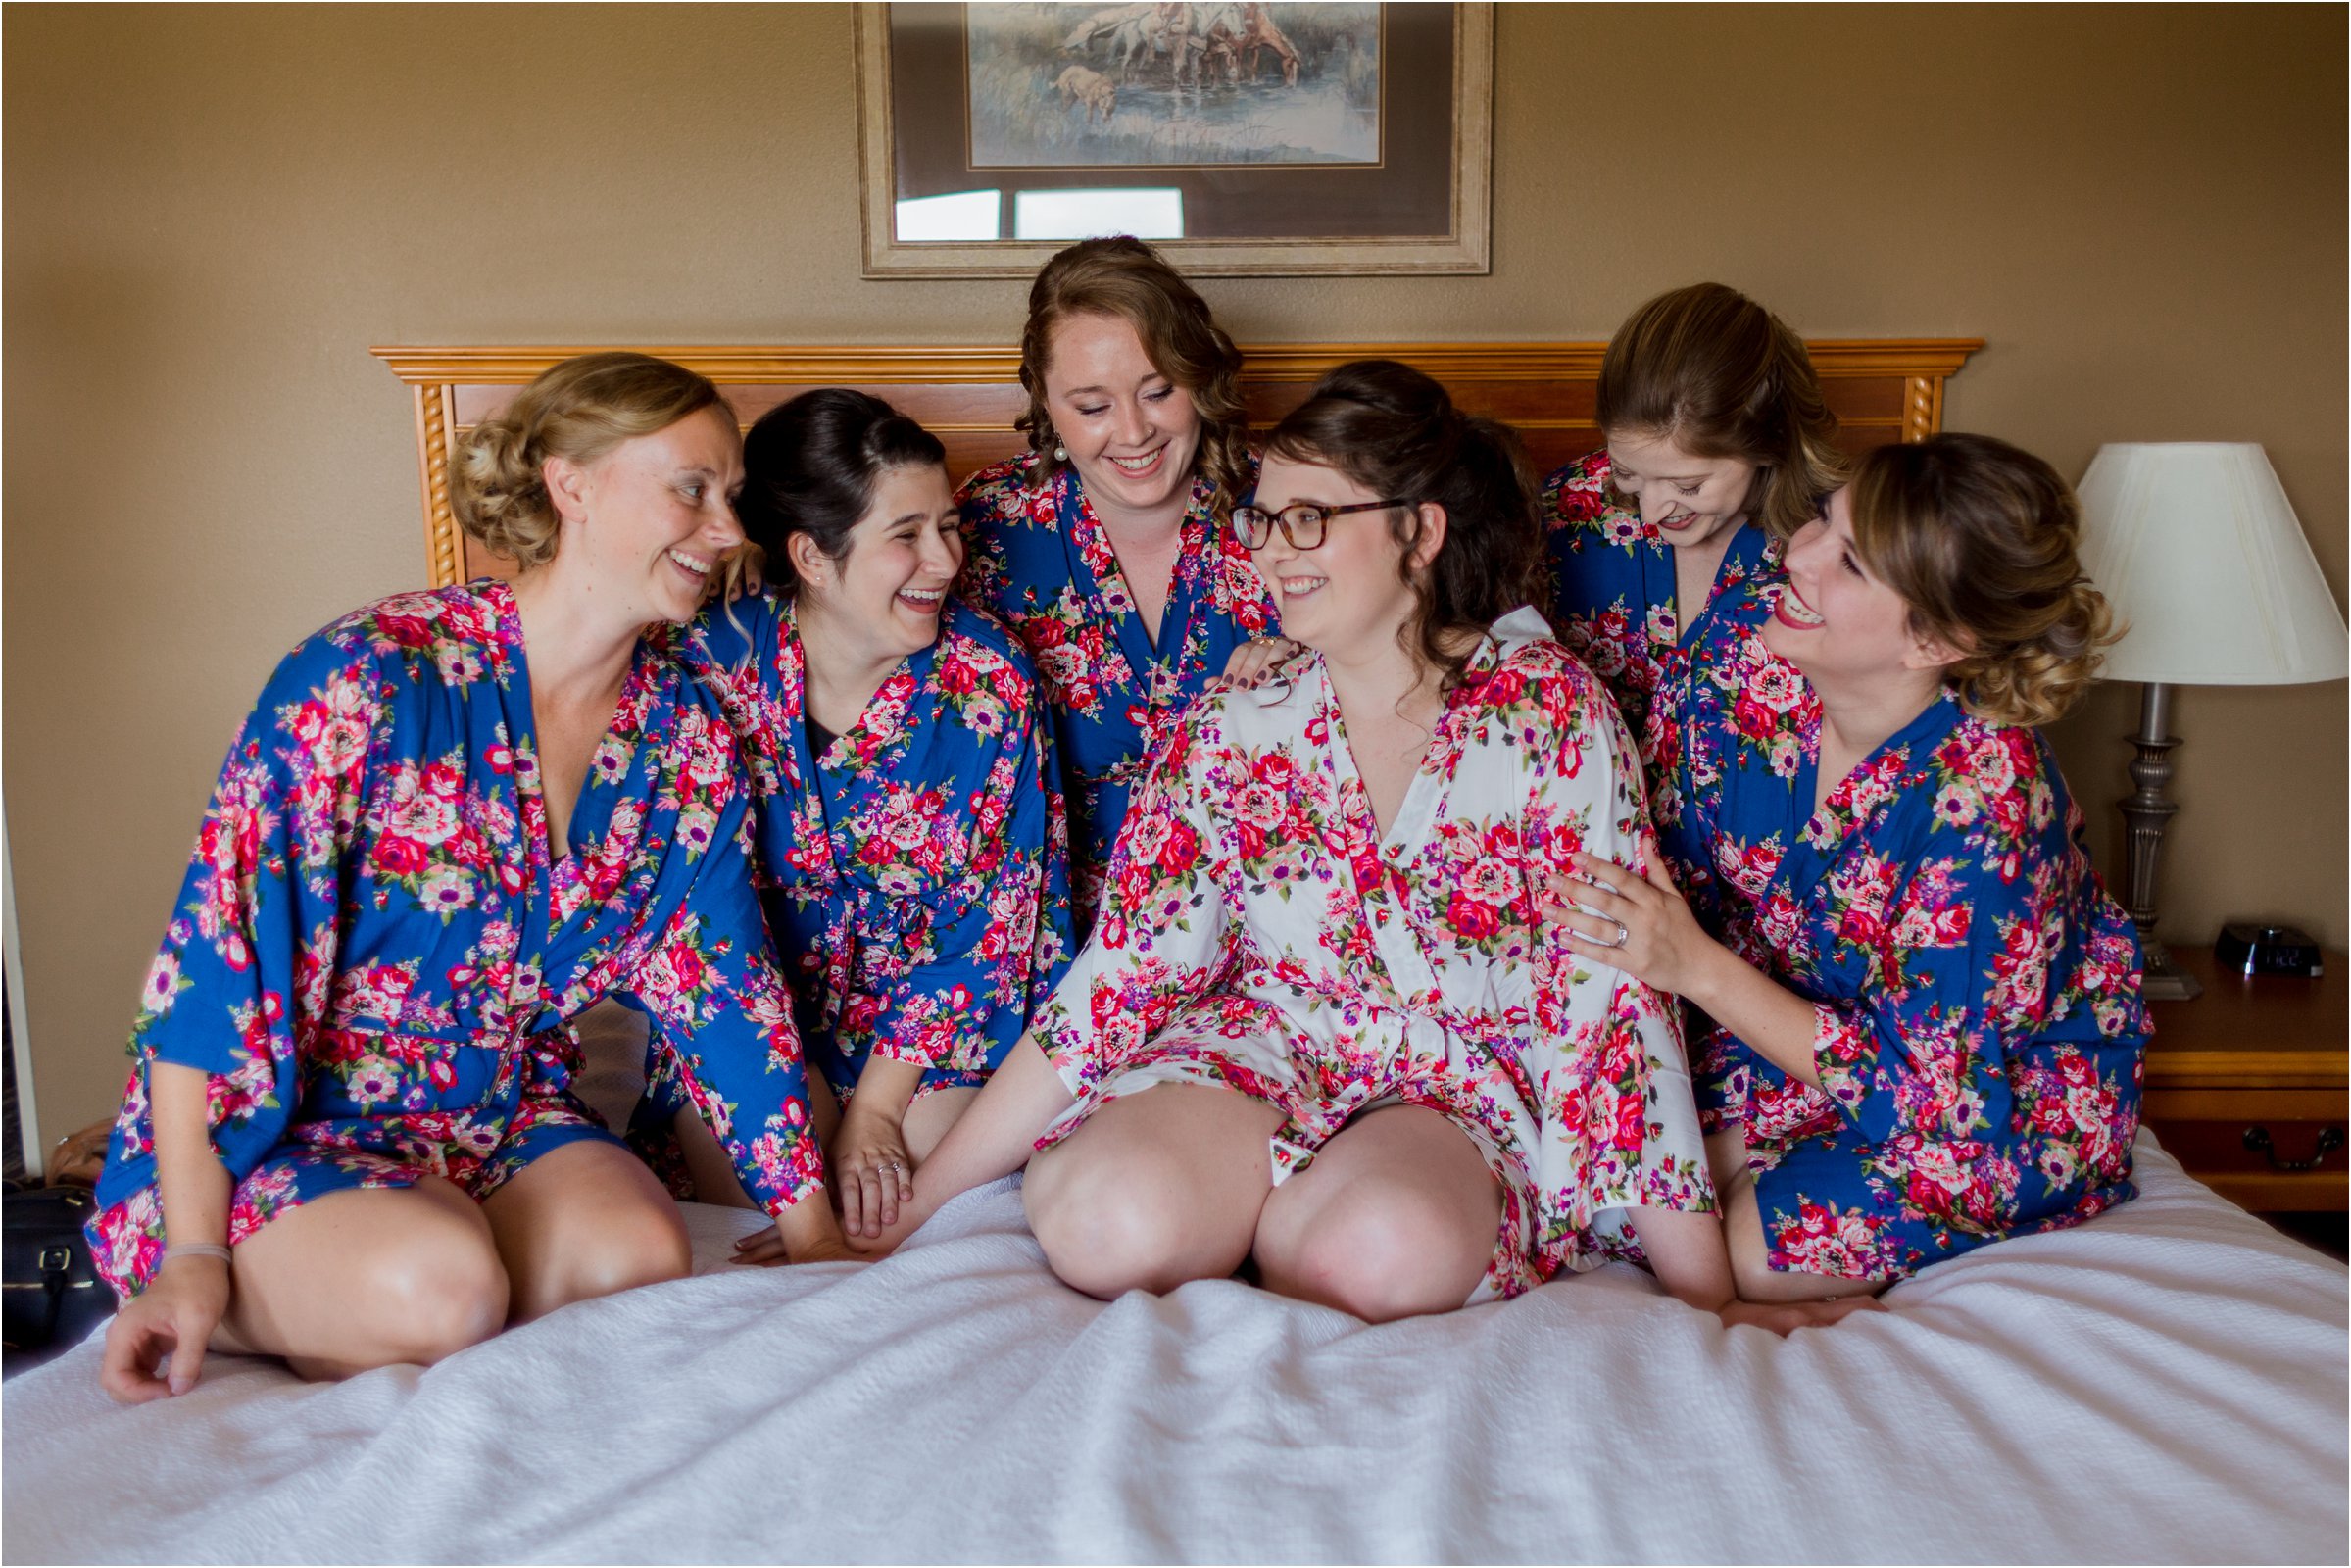 bride and bridesmaids pose on a hotel bed in their floral robes before getting into her wedding dress